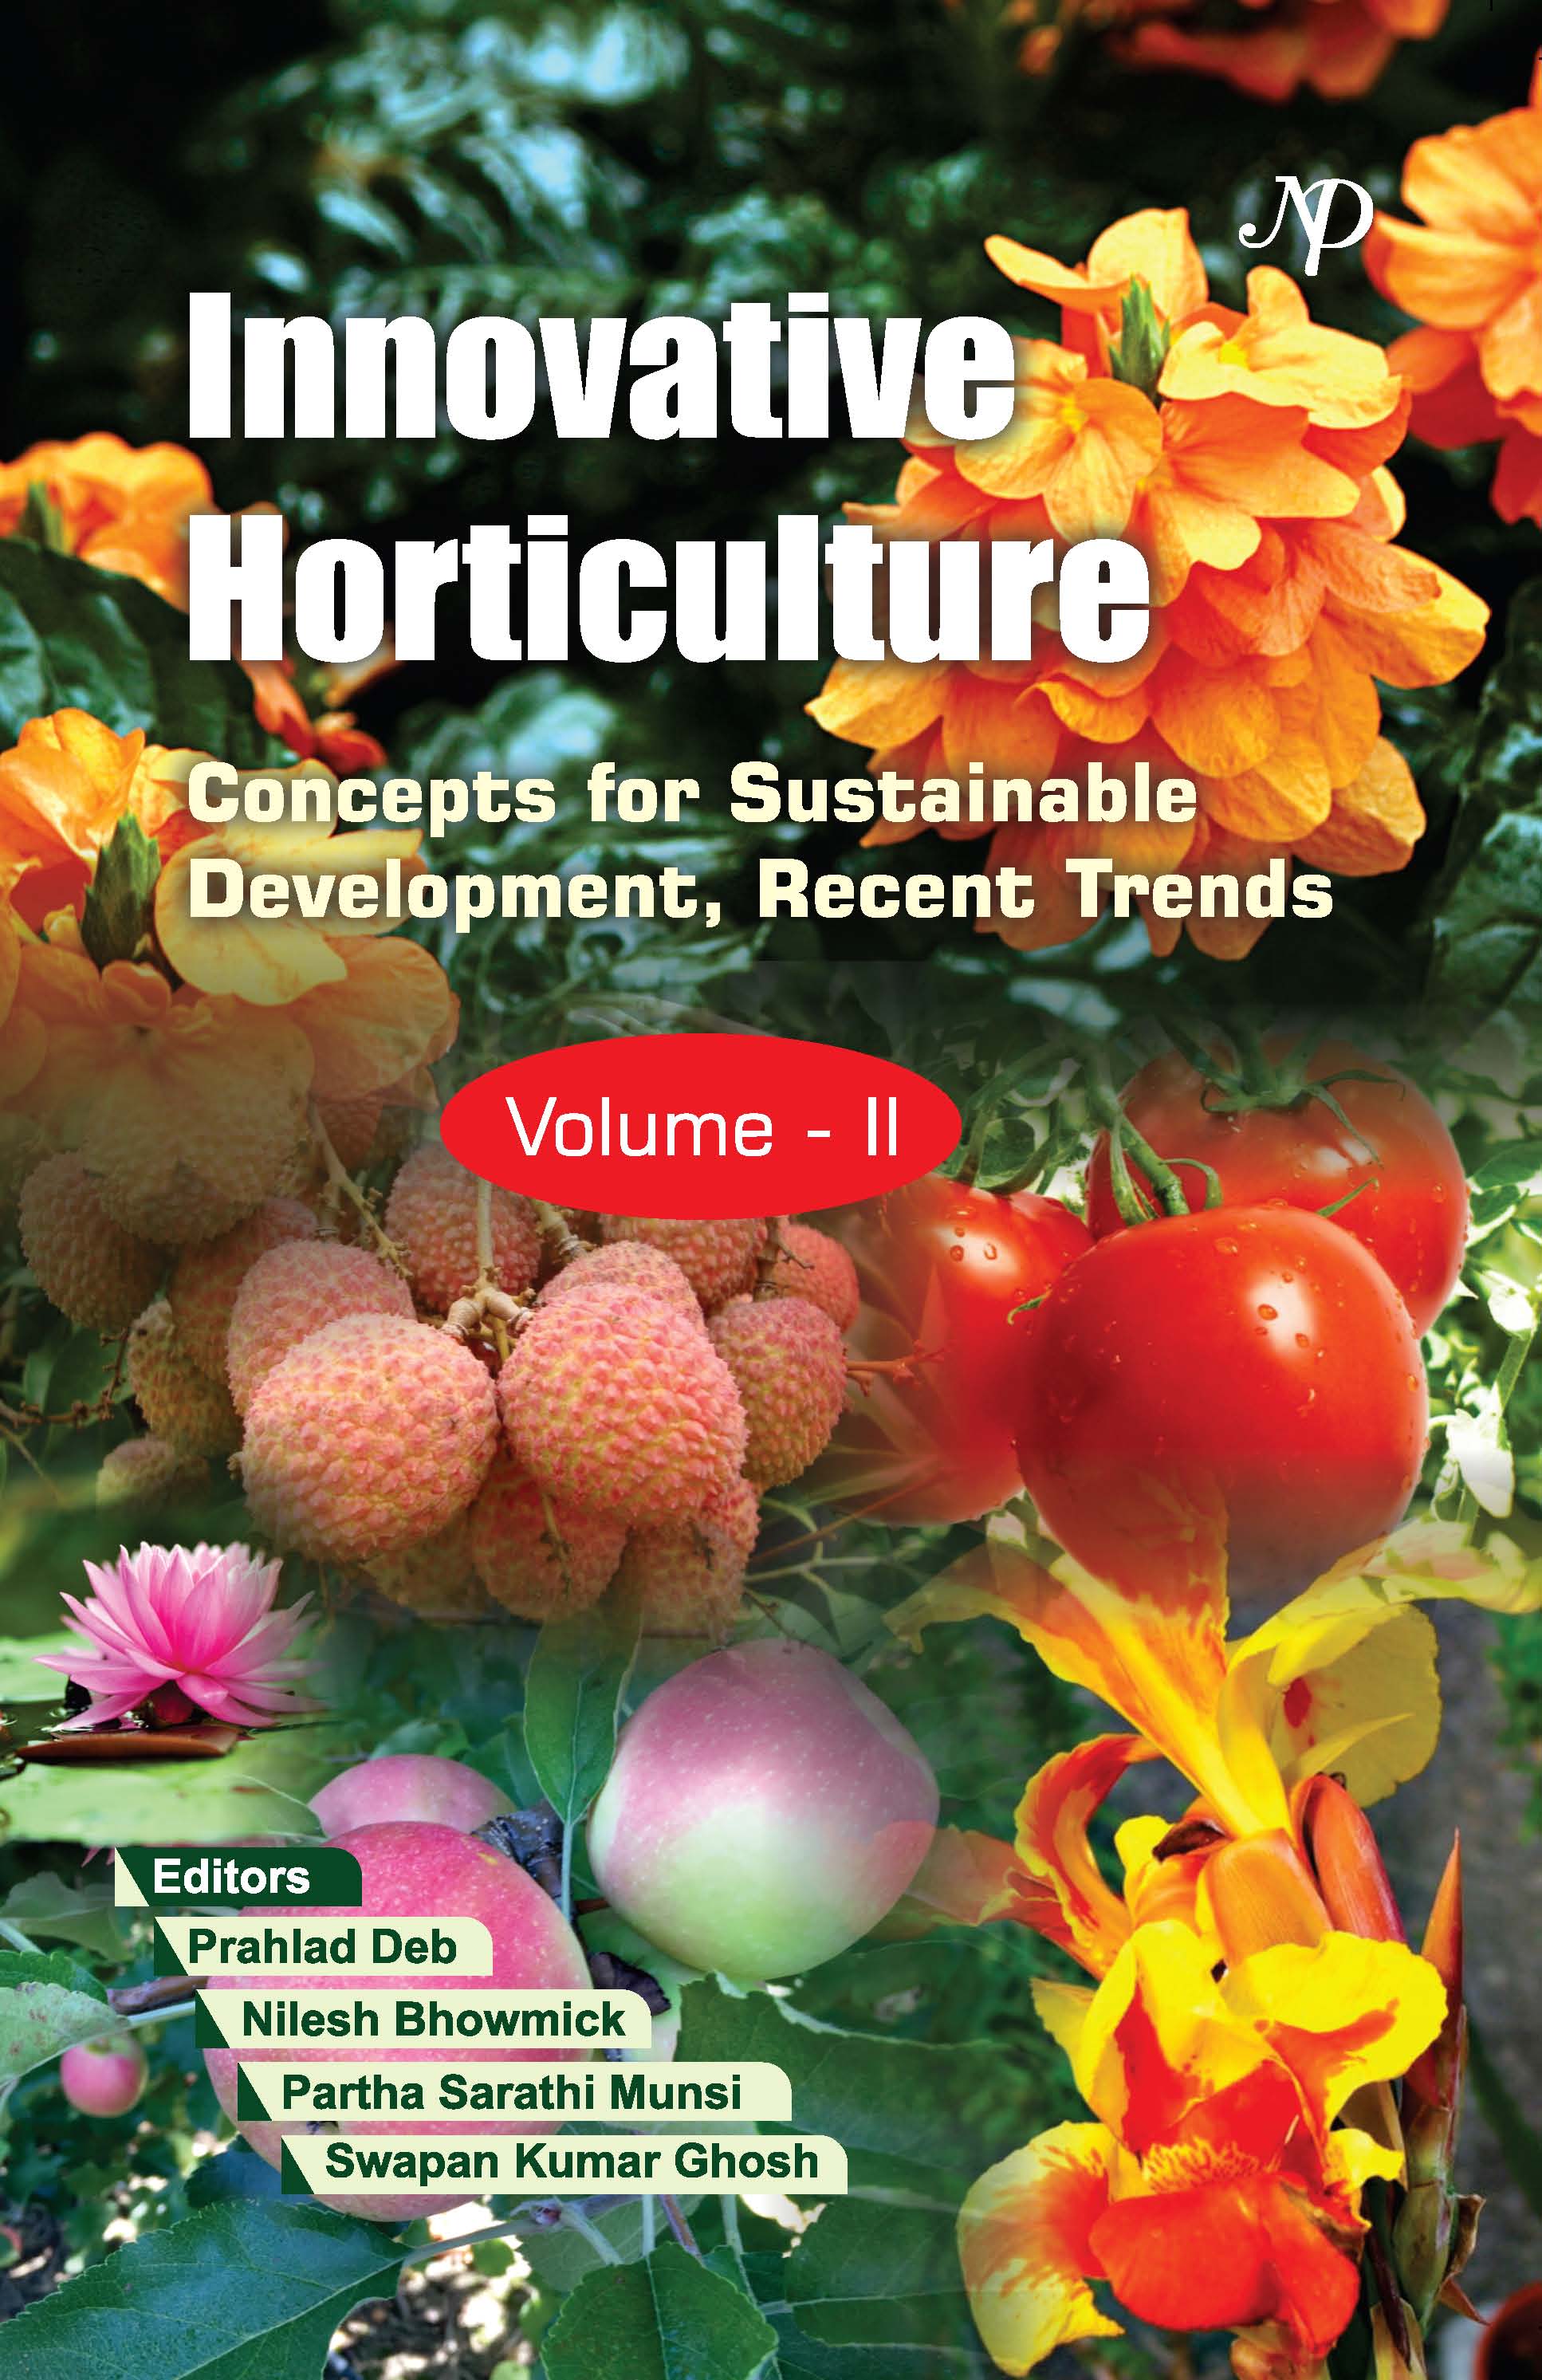 Innovative Horticulture Concepts for Sustainable Development, Recent Trends (Vol. II)